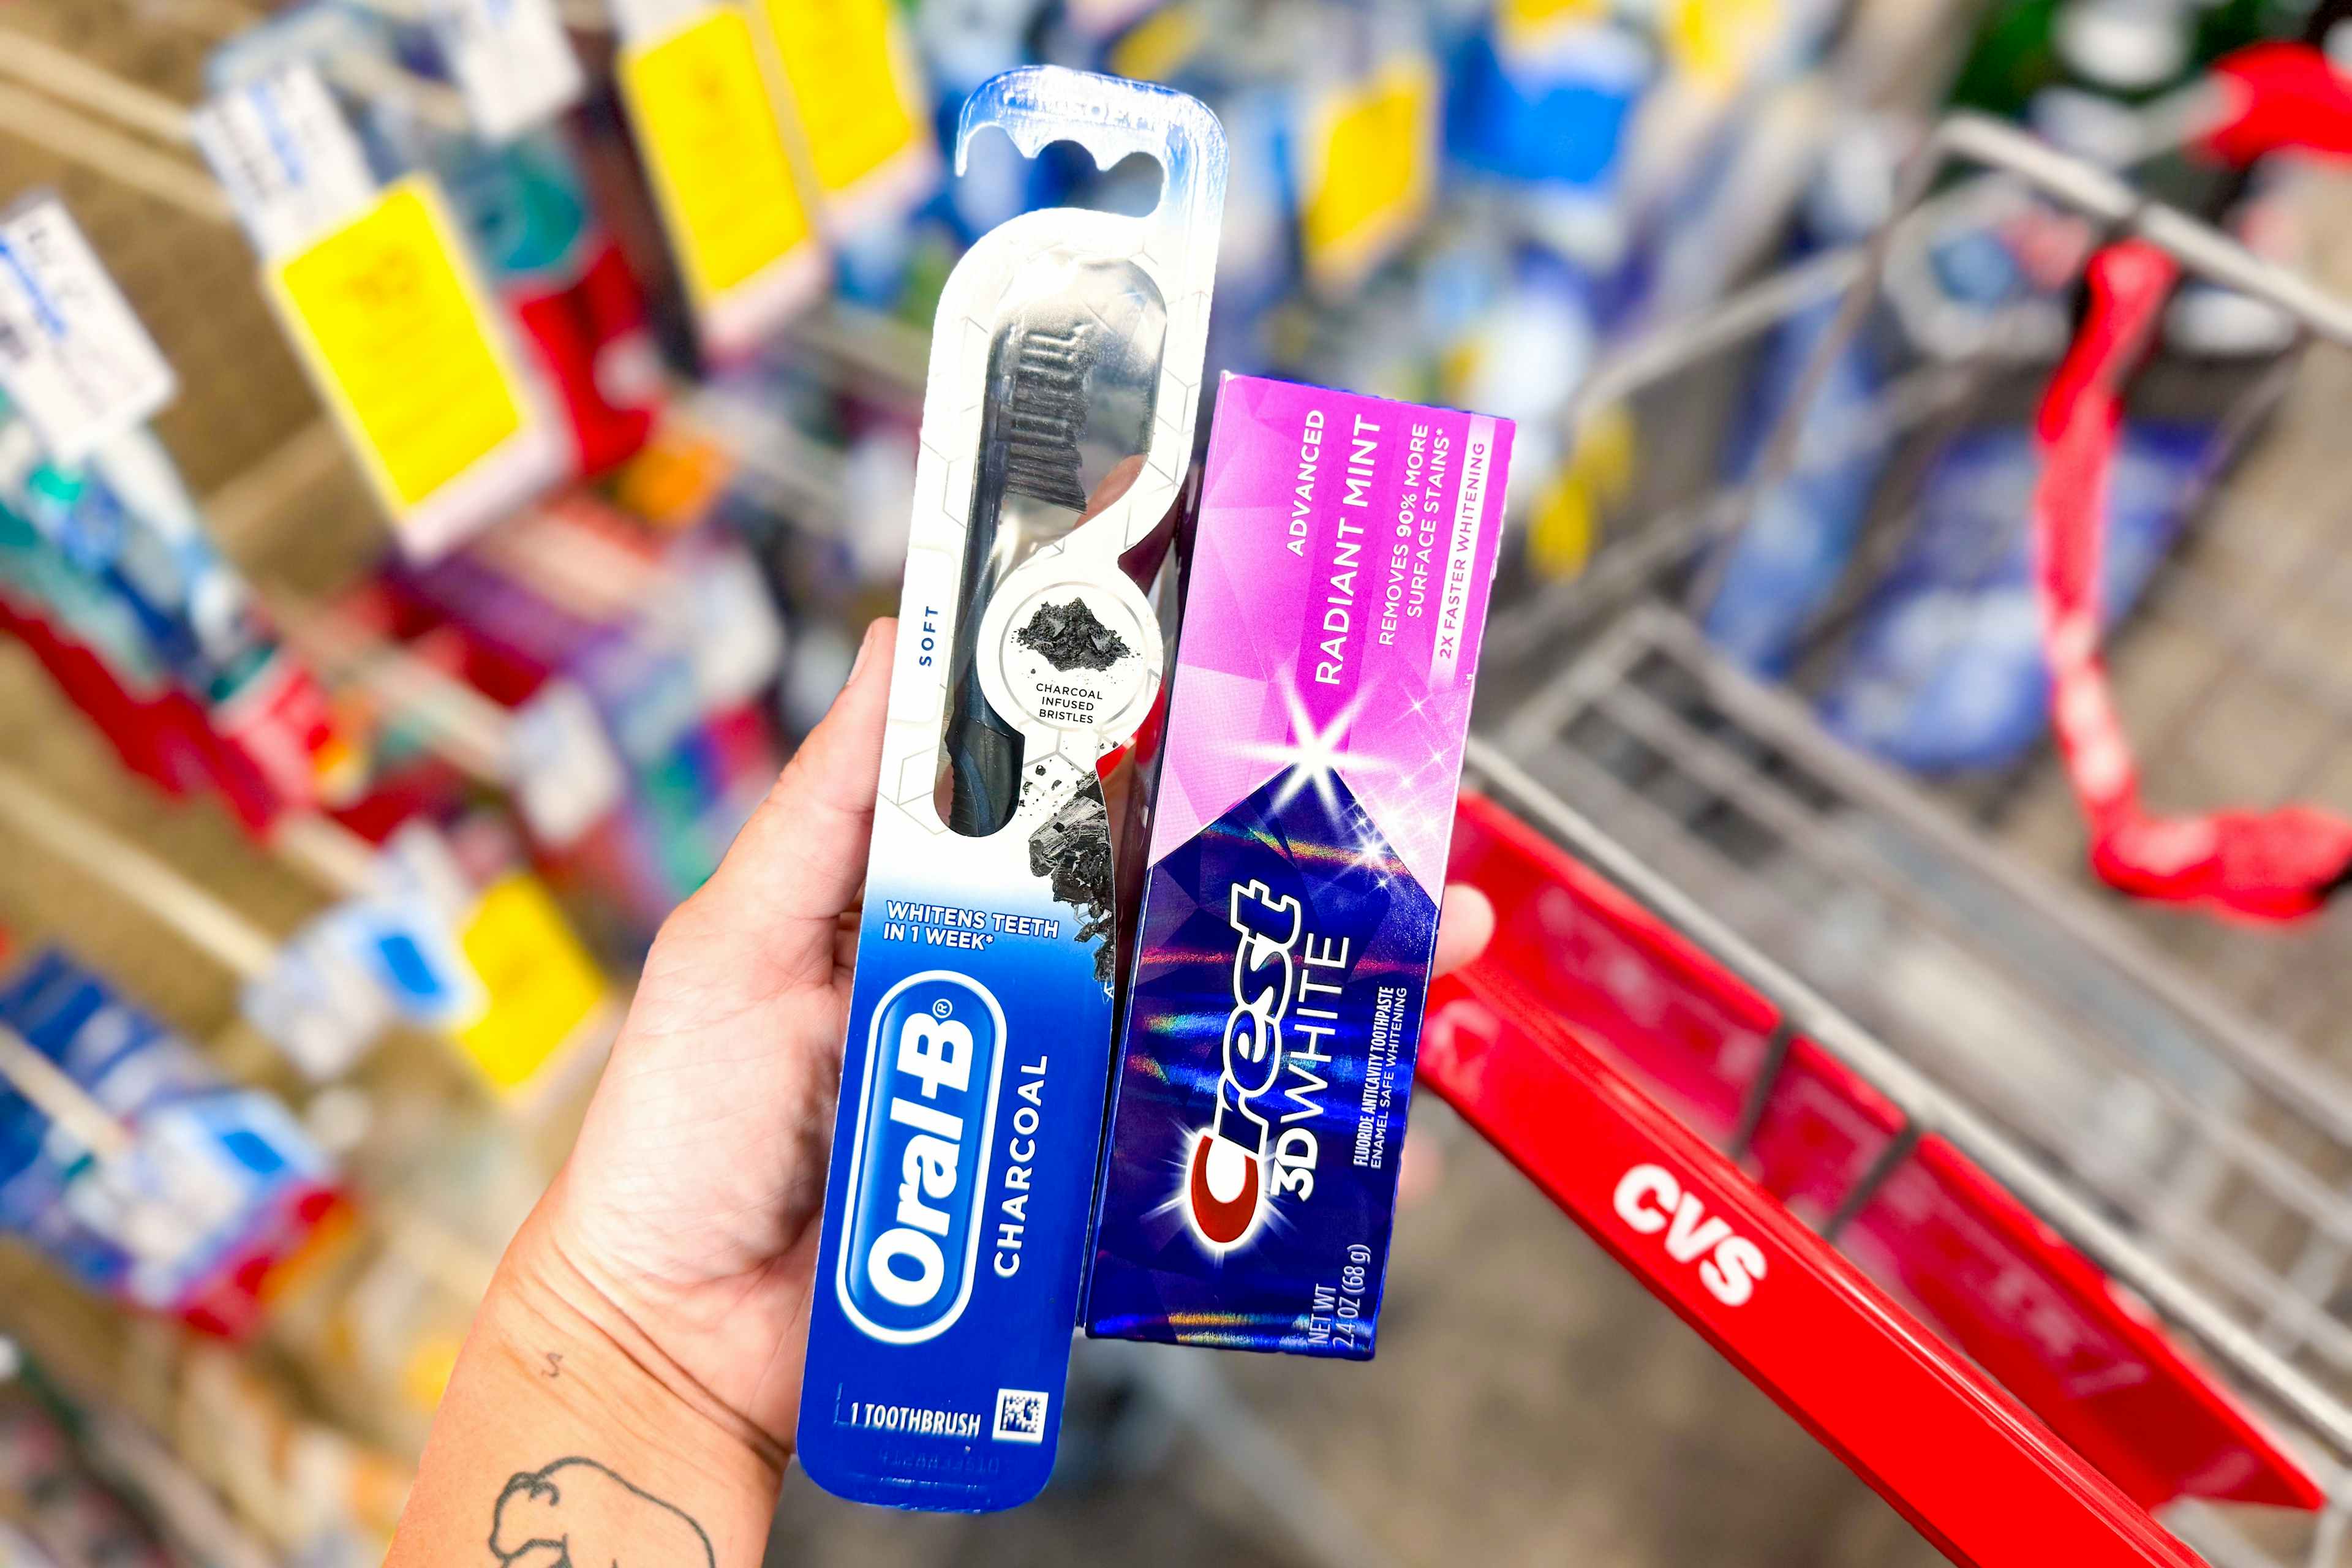 hand holding crest and oral-b products by a cvs shopping cart